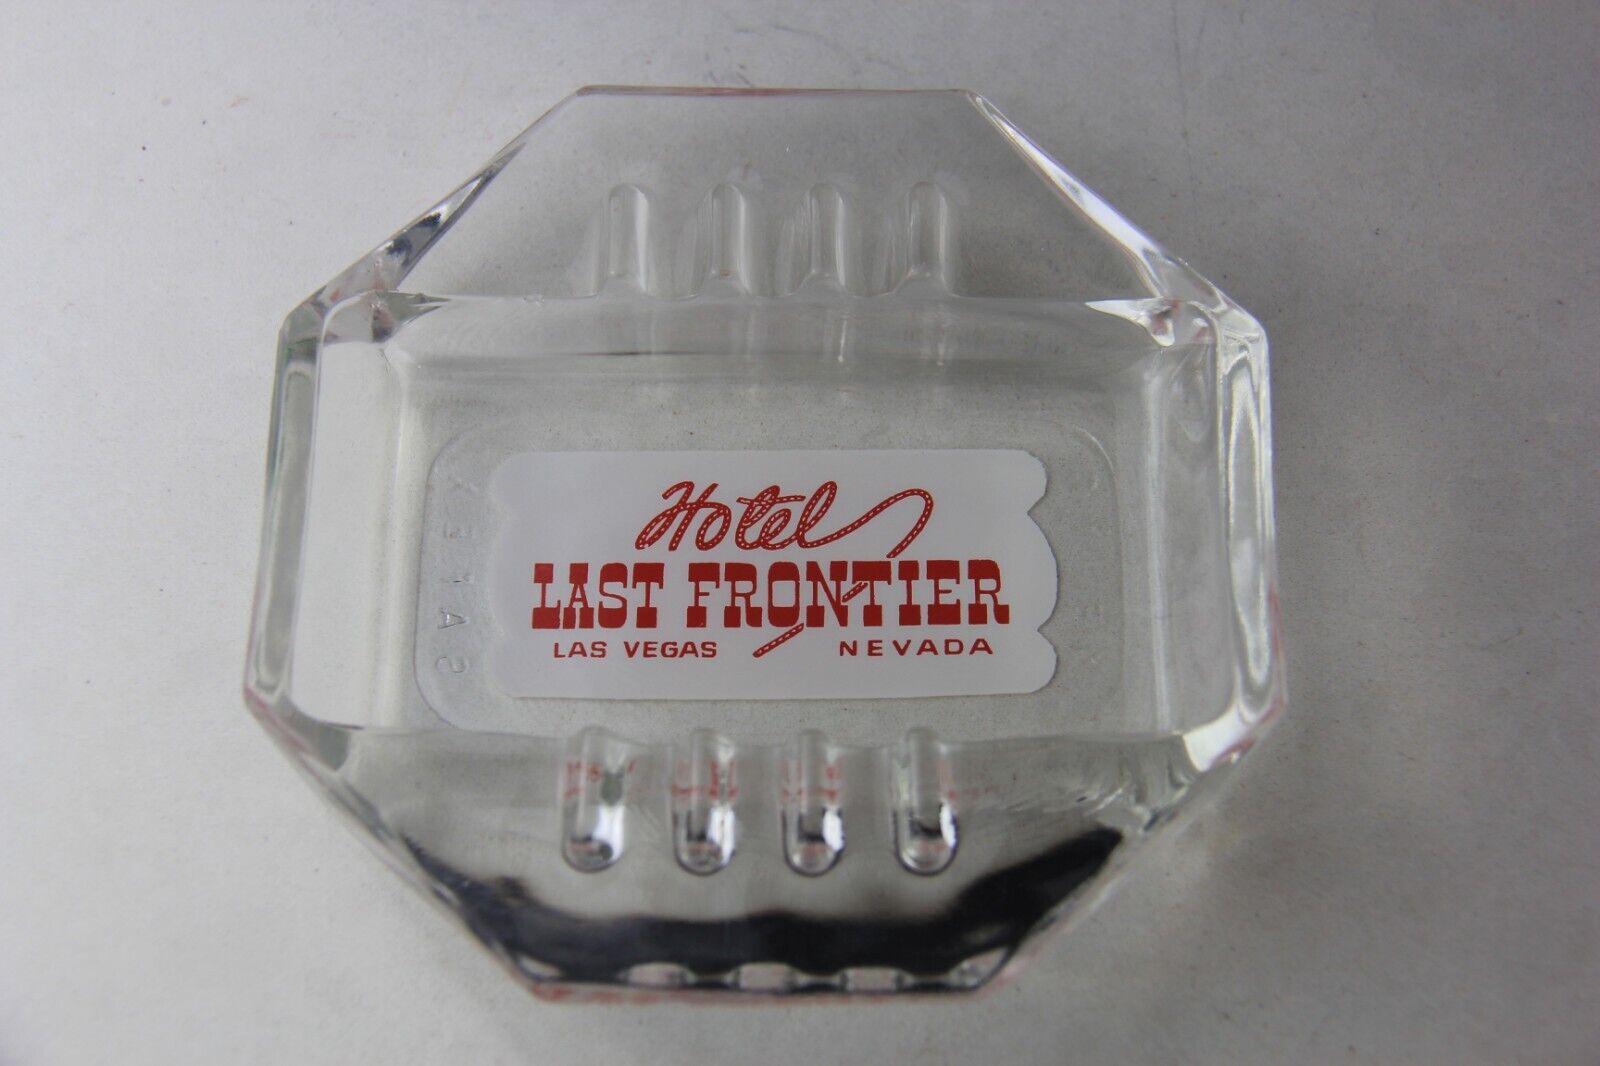 VINTAGE 1950\'S HOTEL LAST FRONTIER GLASS ASHTRAY LAS VEGAS NV CASINO BY SAFEX